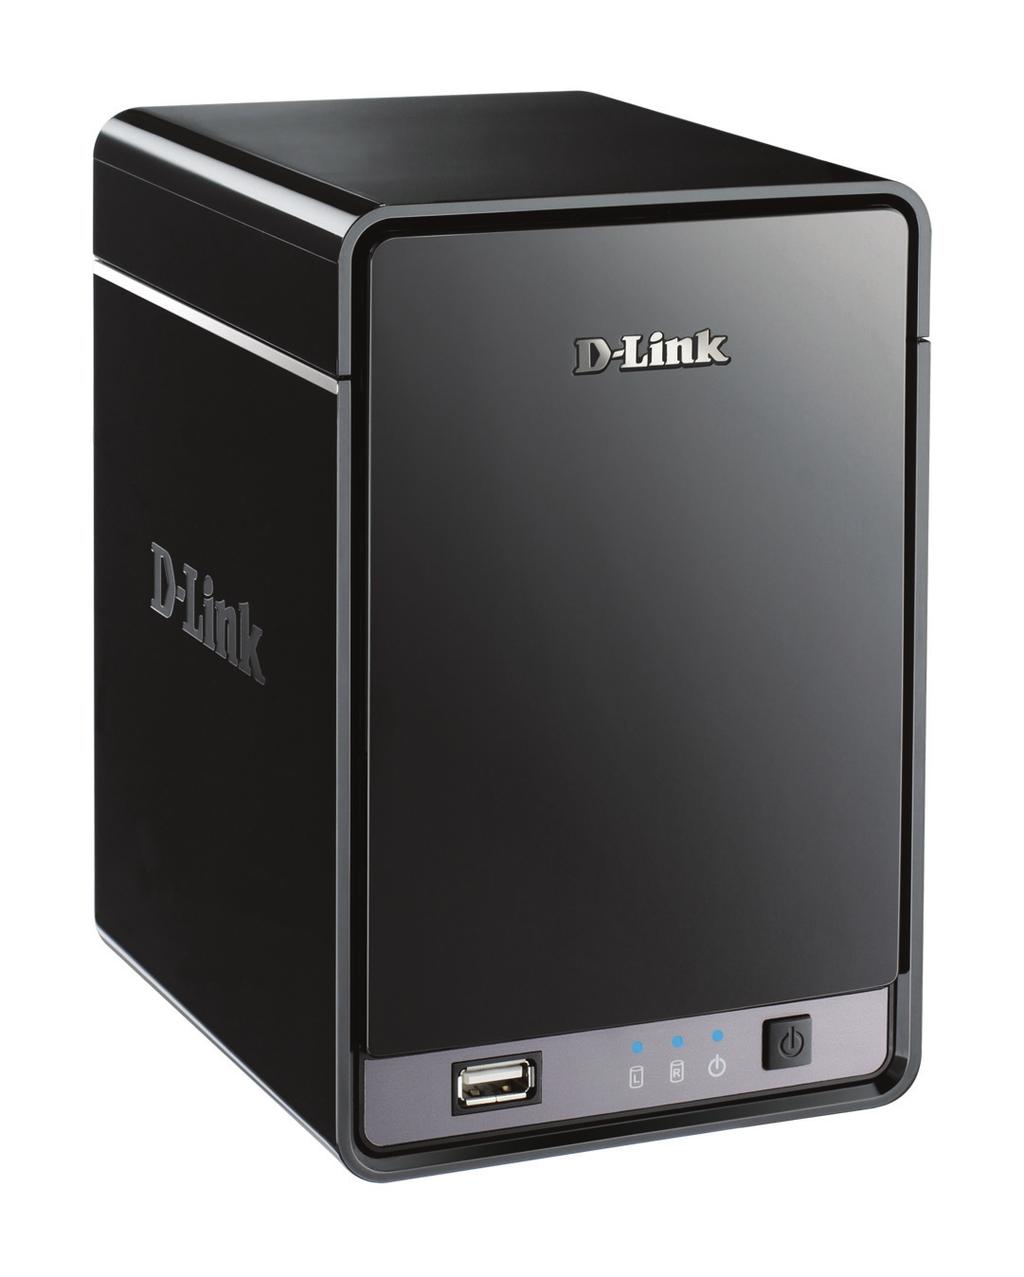 Section 1 - Product Overview Product Overview Package Contents D-Link DNR-322L mydlink Network Video Recorder (NVR) CAT5 Ethernet Cable Power Adapter Cable Holder Keys Manual and Software on CD Quick